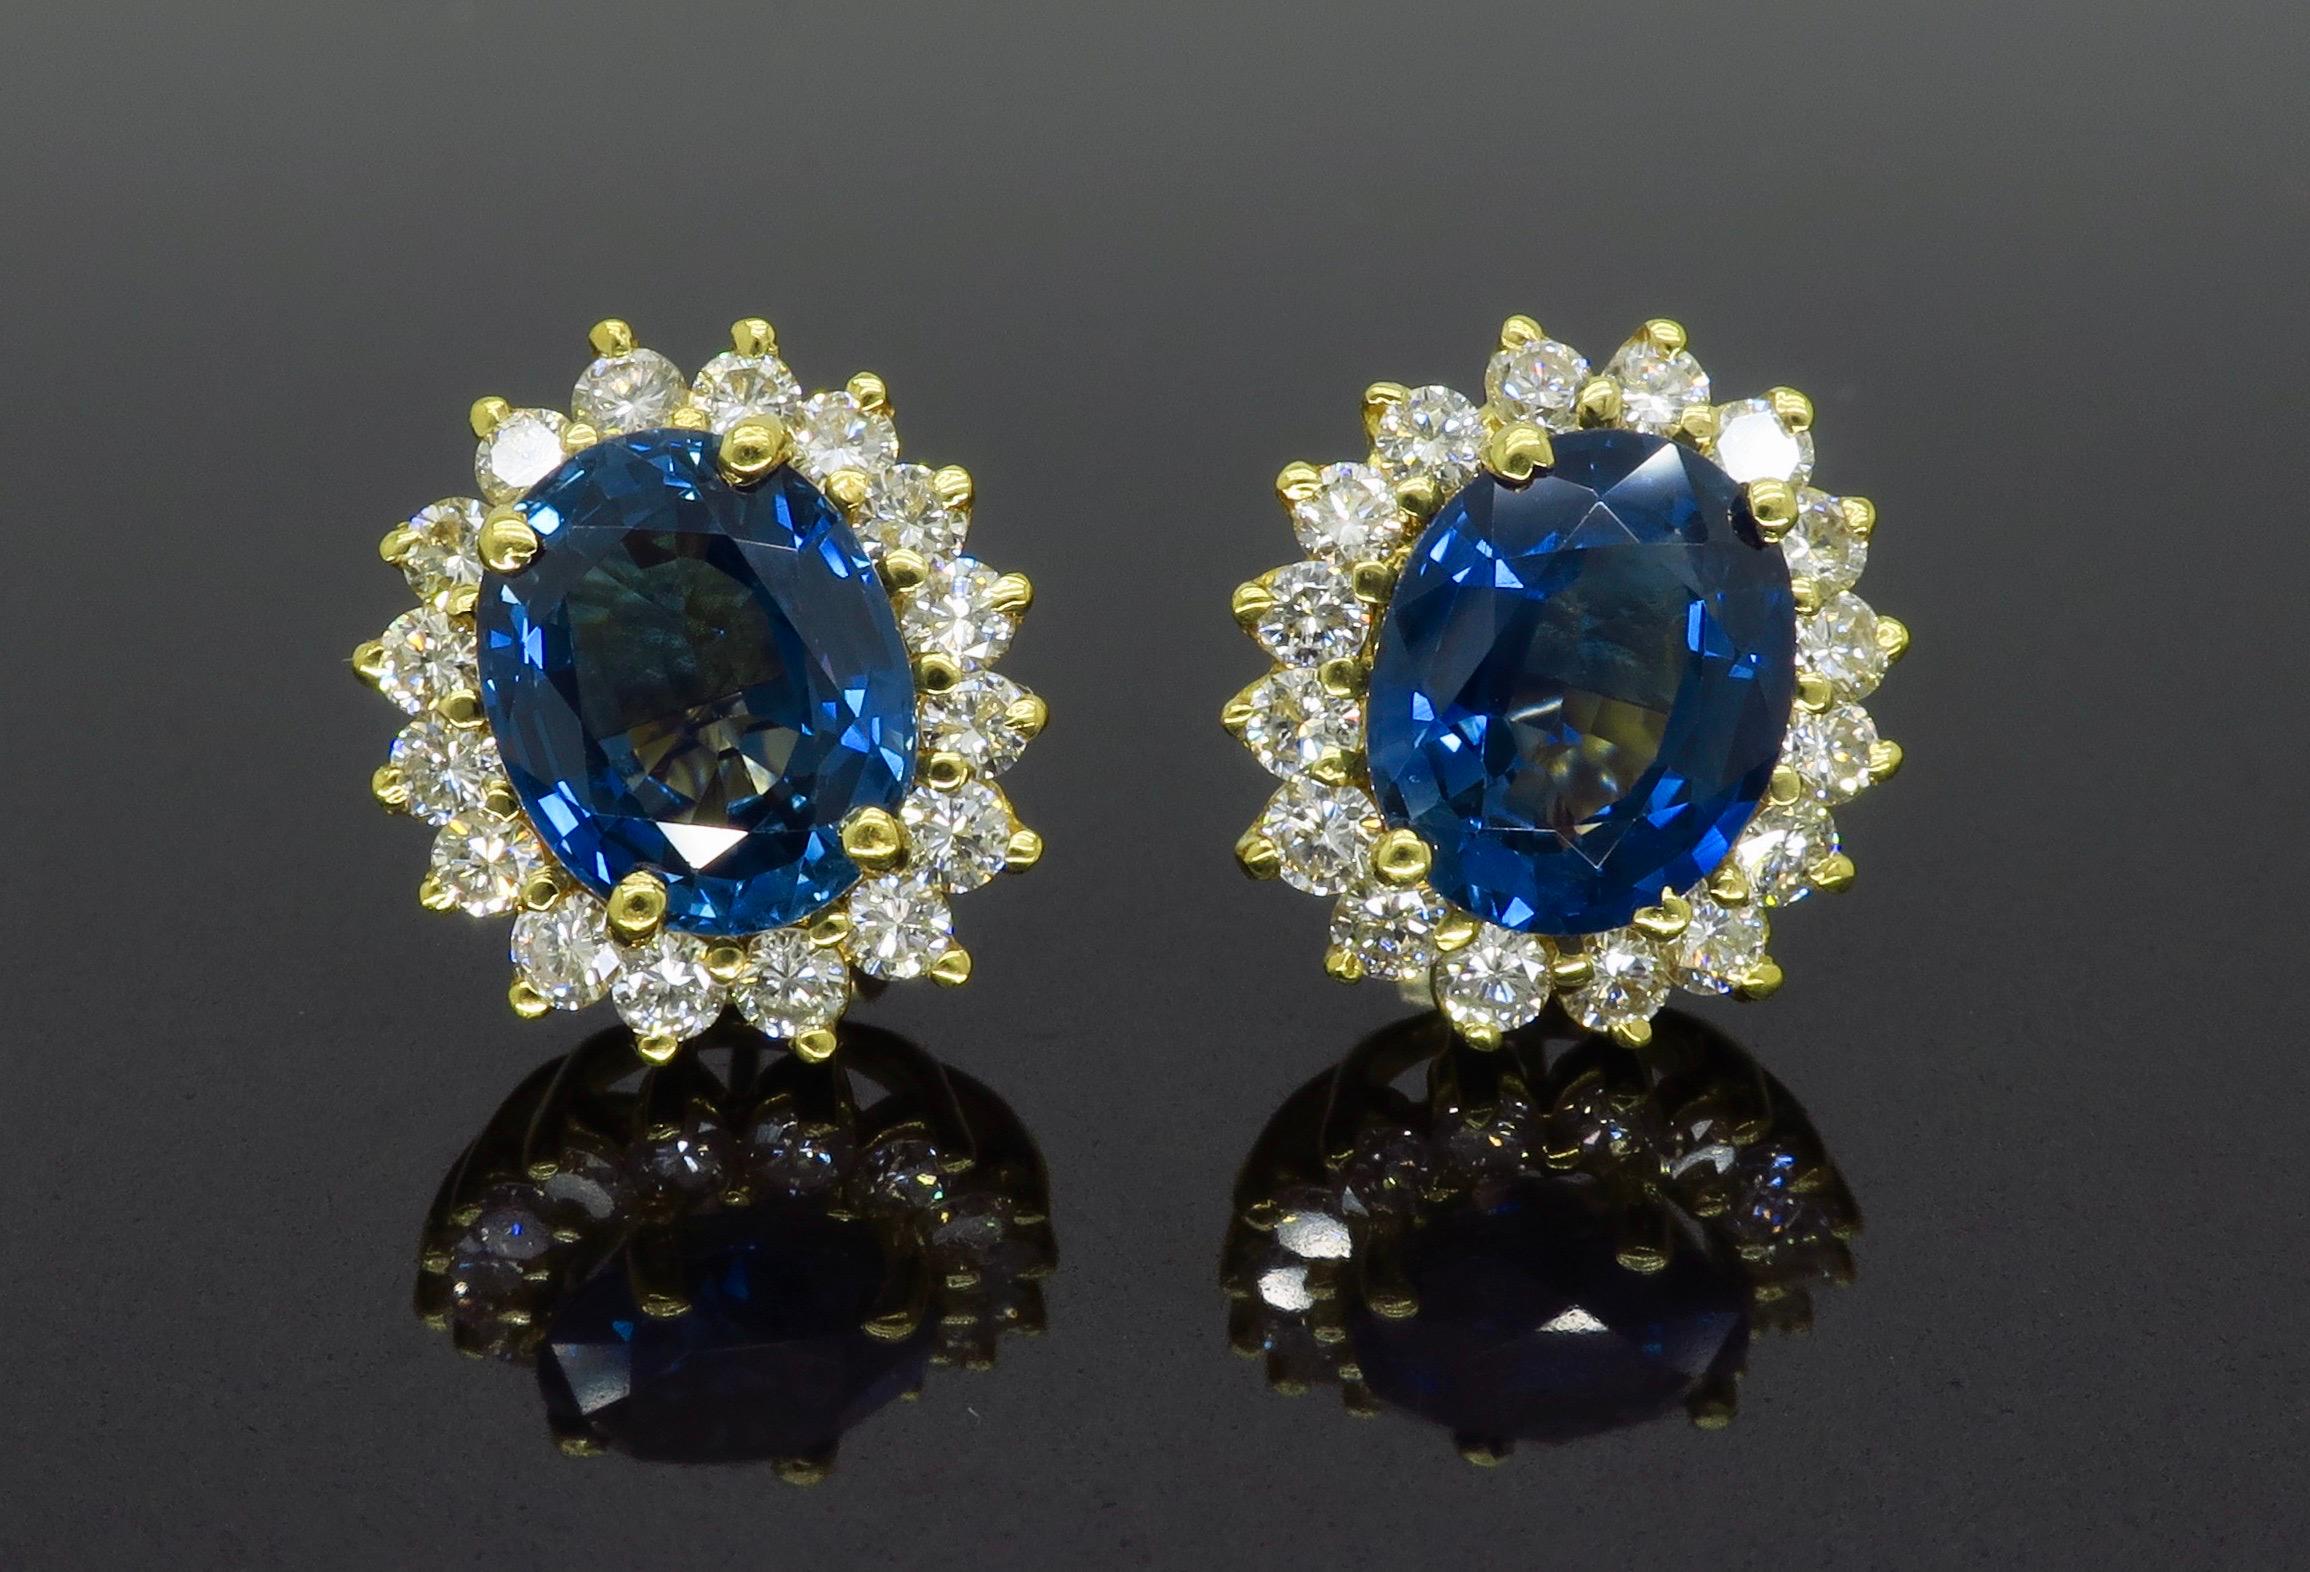 Blue Sapphire and 1.60CTW Round Brilliant Cut diamond halo style earrings in yellow gold.

Gemstone: Blue Sapphire & Diamond
Gemstone Carat Weight: Two Approximately 9.7x7.8mm Blue Sapphires
Diamond Carat Weight:  Approximately 1.60CTW
Diamond Cut: